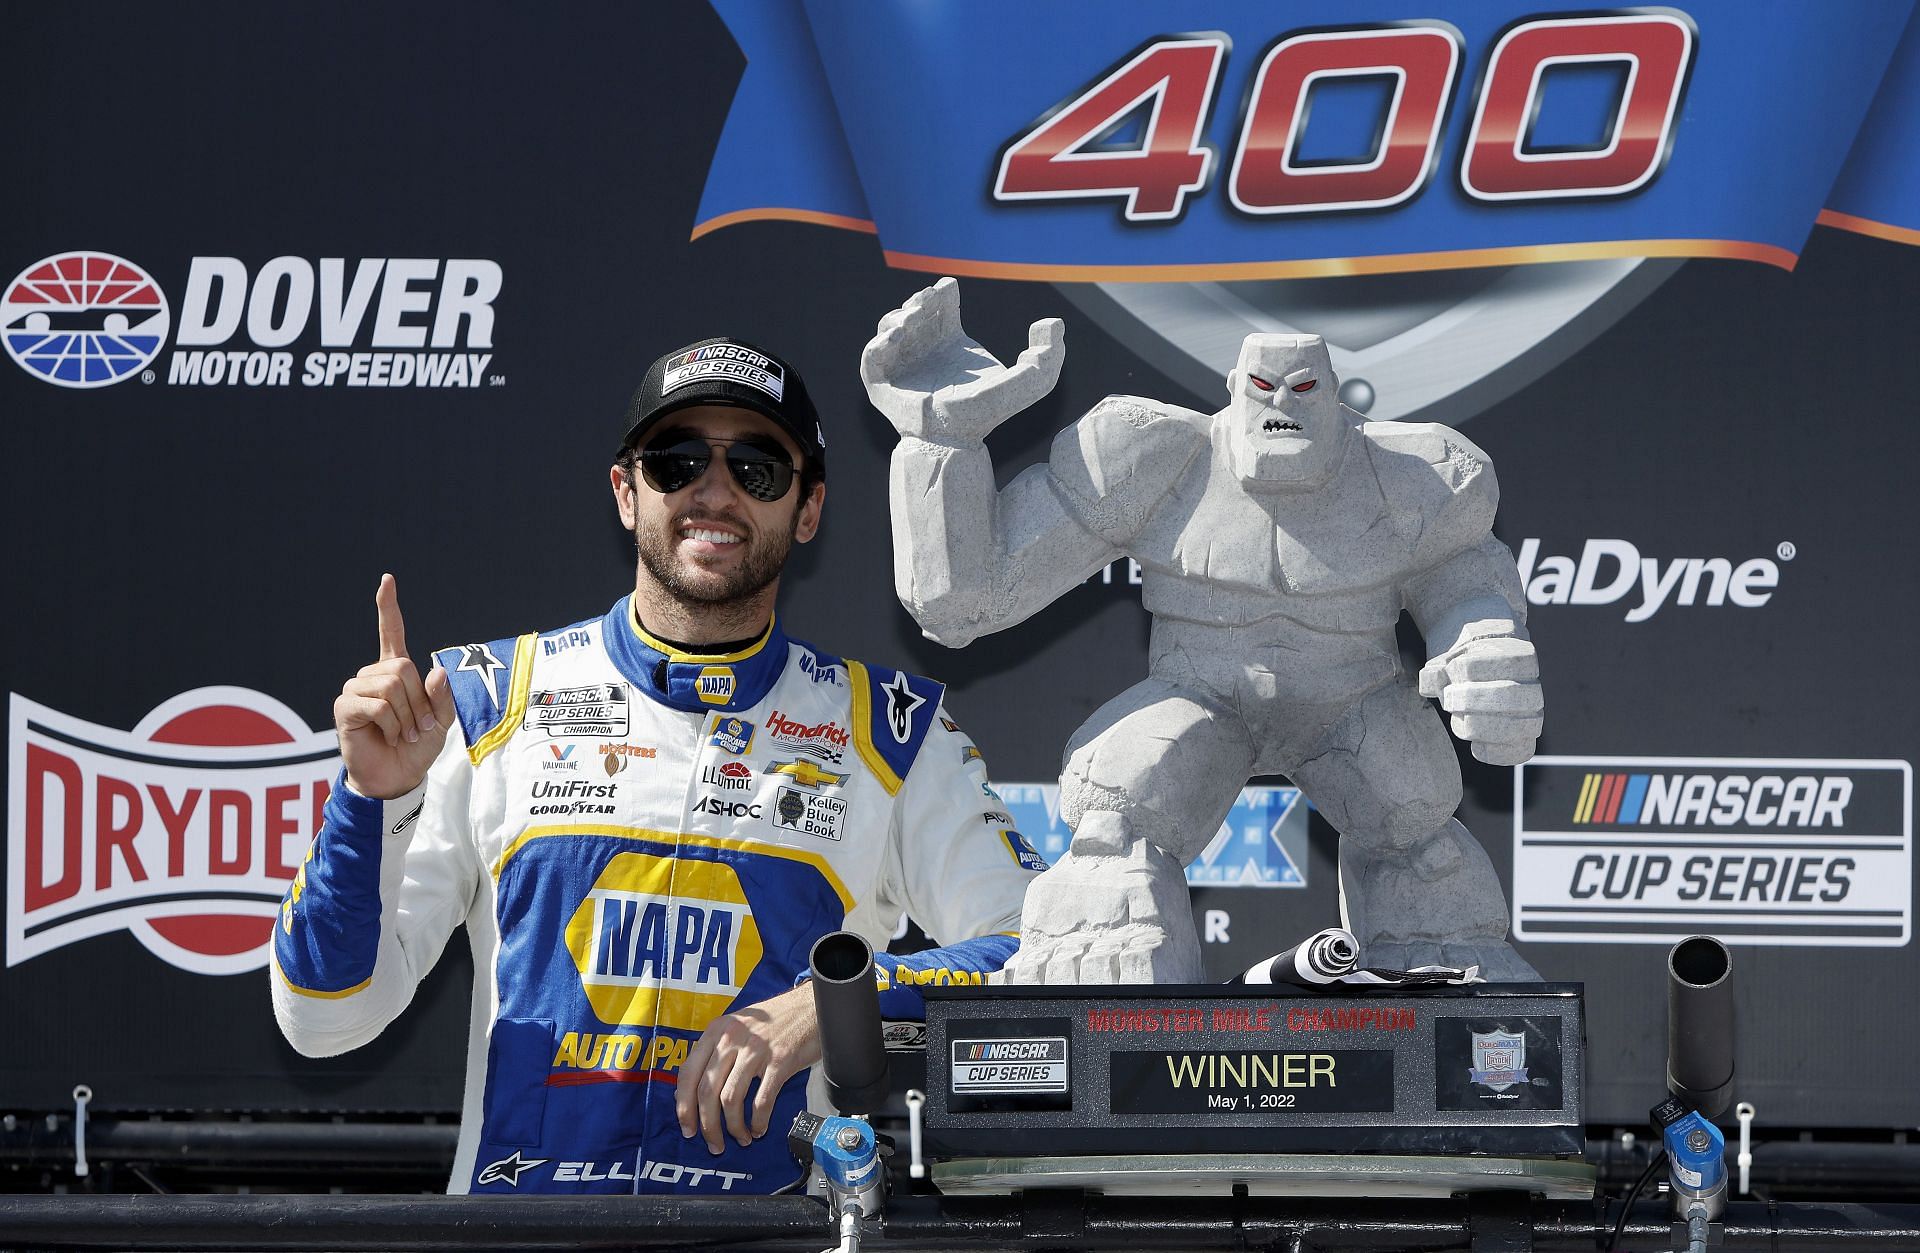 Chase Elliott celebrates in victory lane after winning the NASCAR Cup Series DuraMAX Drydene 400 presented by RelaDyne at Dover Motor Speedway (Photo by Sean Gardner/Getty Images)